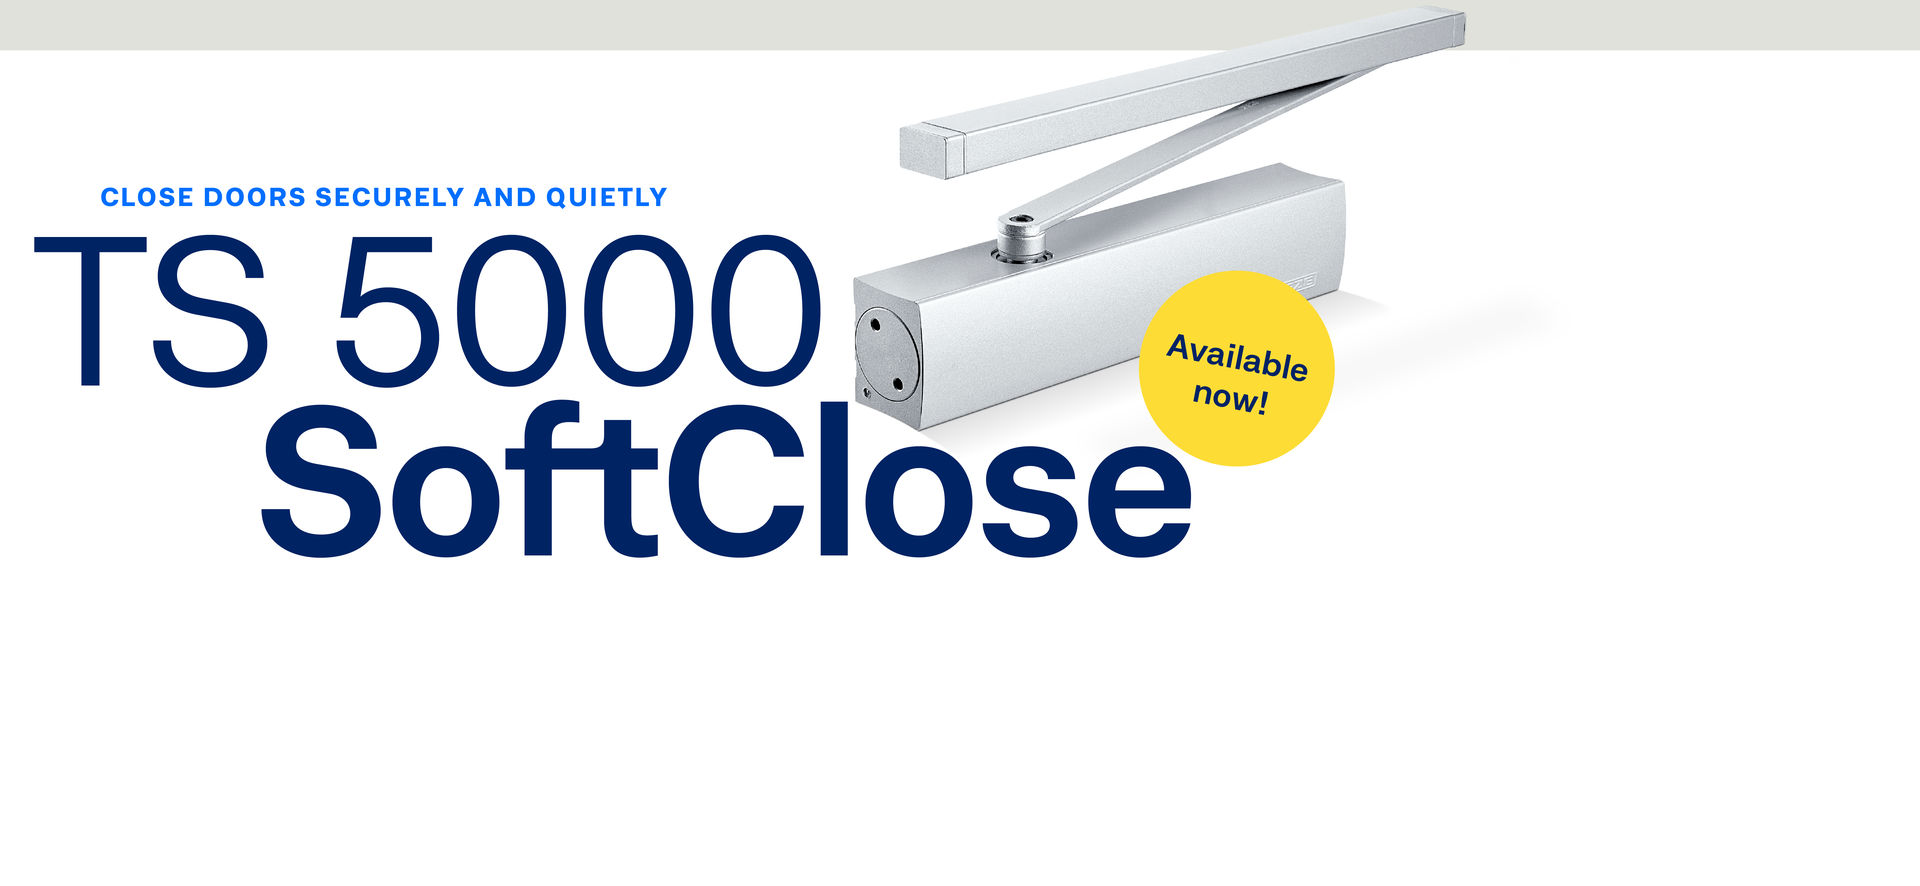 Your doors close quietly and safely with our new TS 5000 SoftClose.